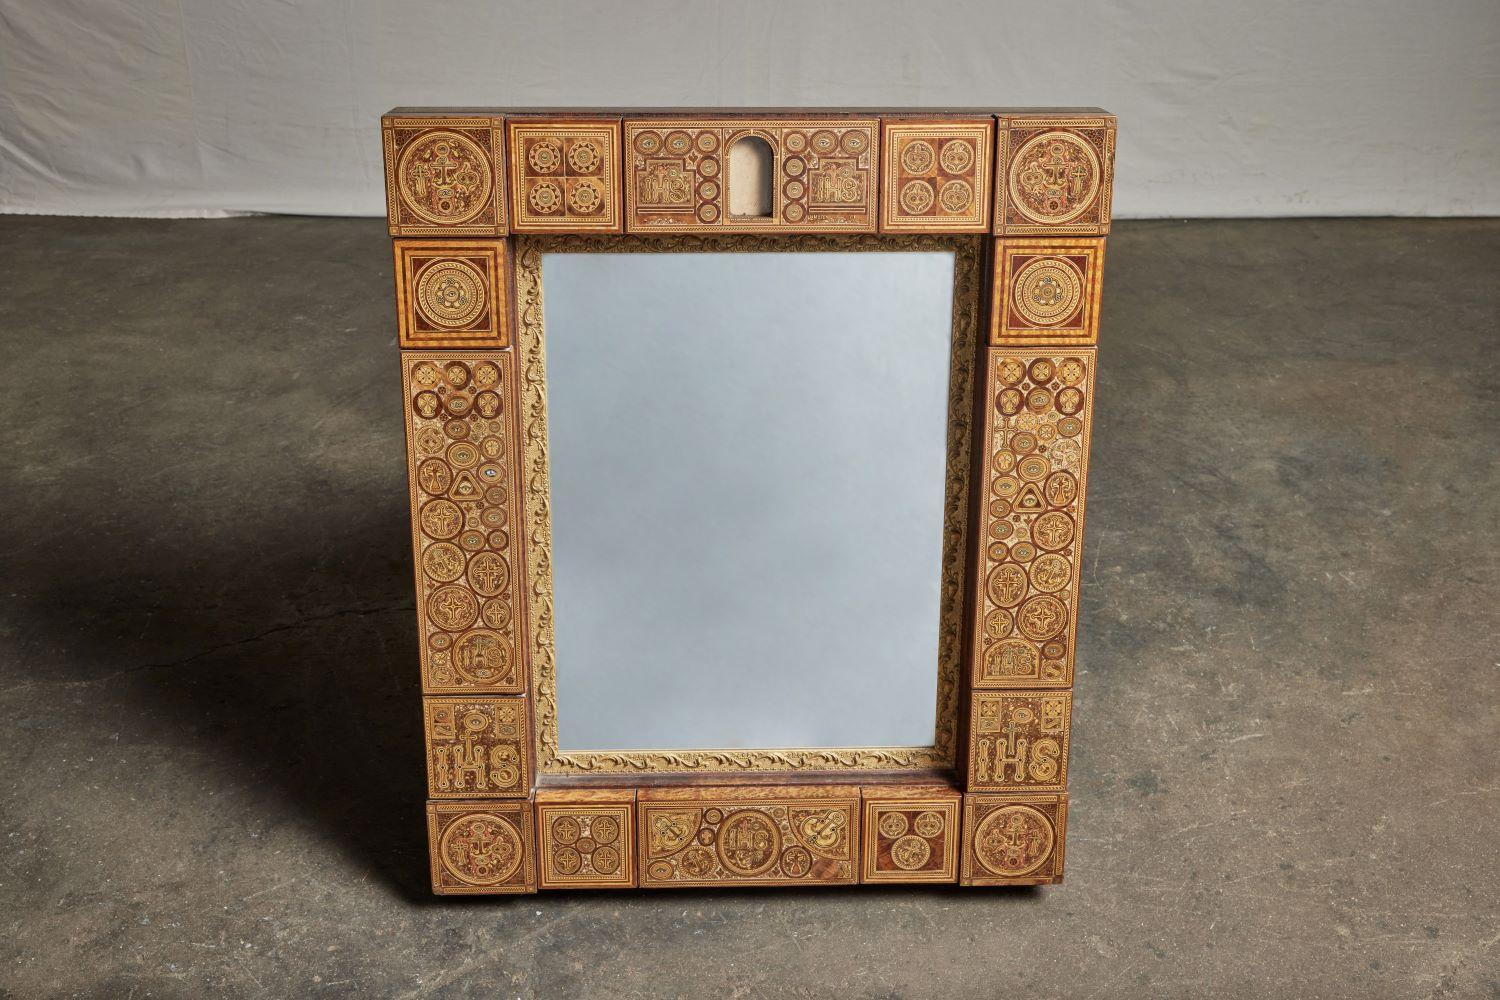 19th Century Middle Eastern Inlaid wood mirror.